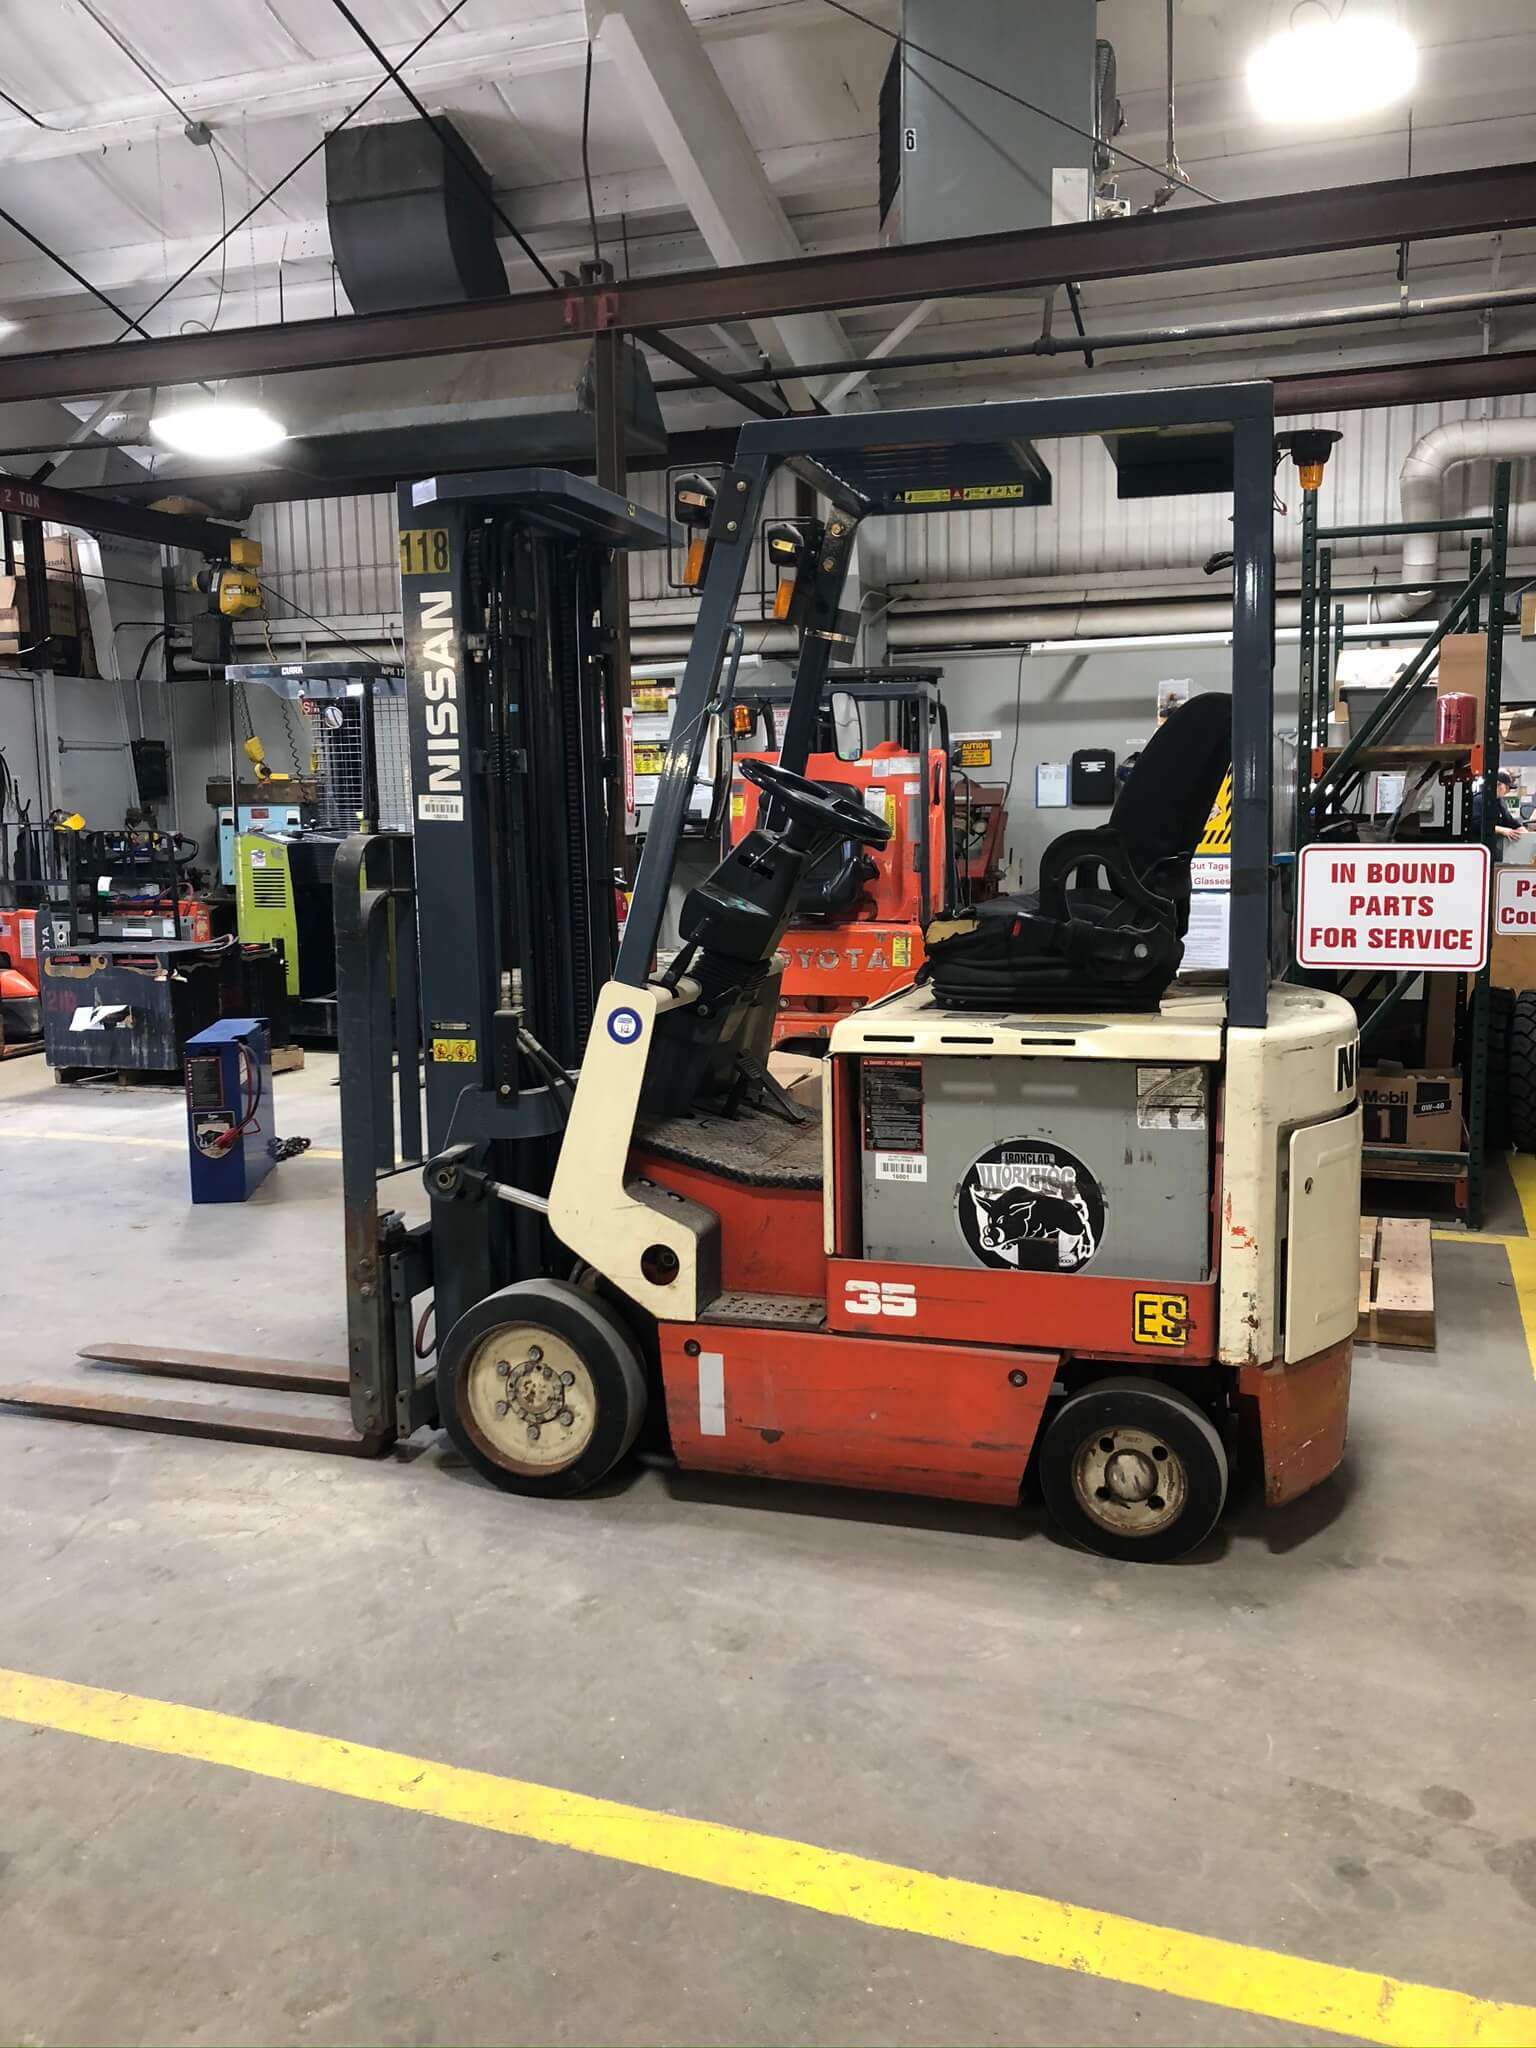 Nissan Forklift Csp01l18s For Sale In Nh Ma Me Wd Matthews